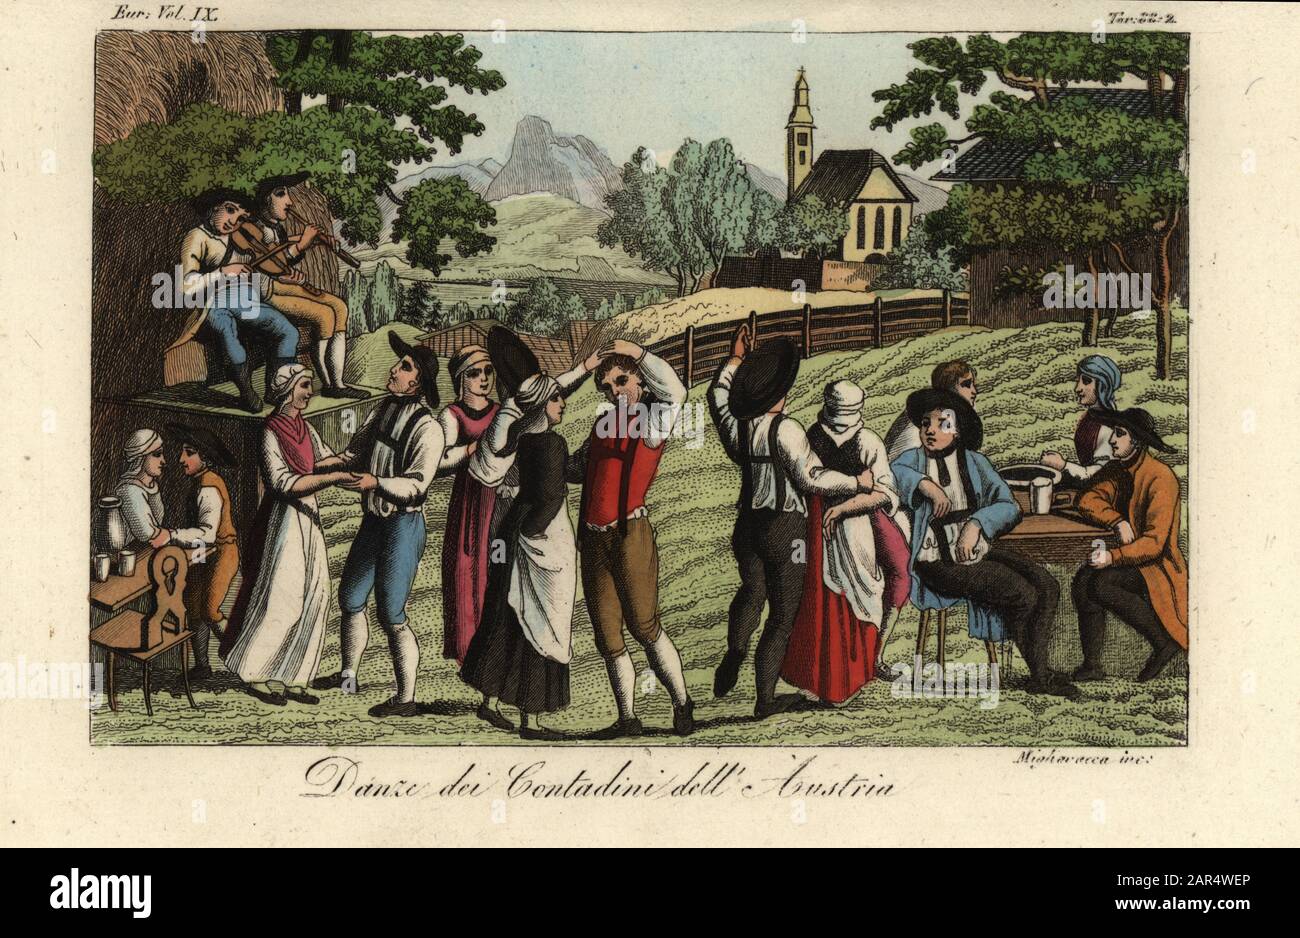 Peasants dancing in fields, Austria, 1822. Men and women dance together to music from a fiddler and recorder. Danze dei Contadini dell’Austria. Taken from Alexandre de Laborde’s Voyage pittoresque en Autriche, 1822. Handcoloured copperplate engraving by Migliavacca from Giulio Ferrario’s Costumes Ancient and Modern of the Peoples of the World, Il Costume Antico e Moderno, Florence, 1844. Stock Photo